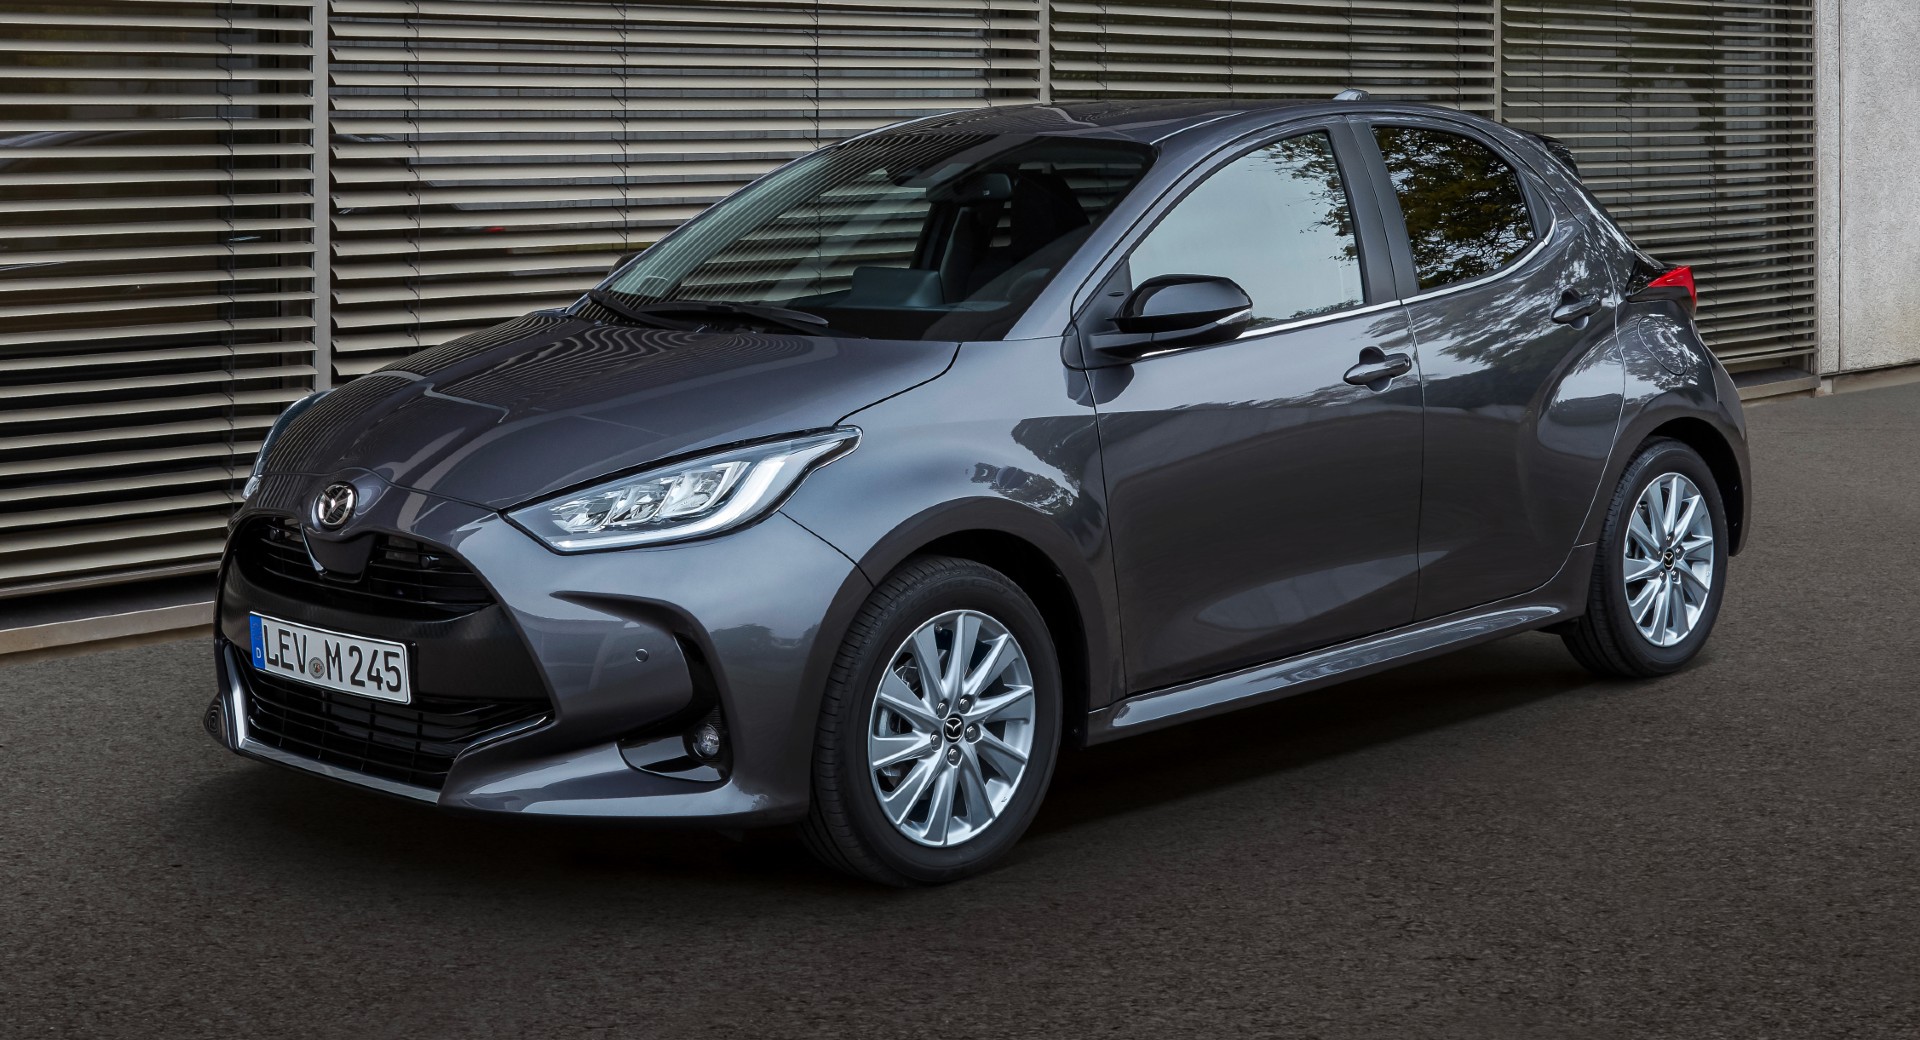 New Mazda2 Hybrid Is Cheaper Than Its Toyota Yaris Twin In The UK